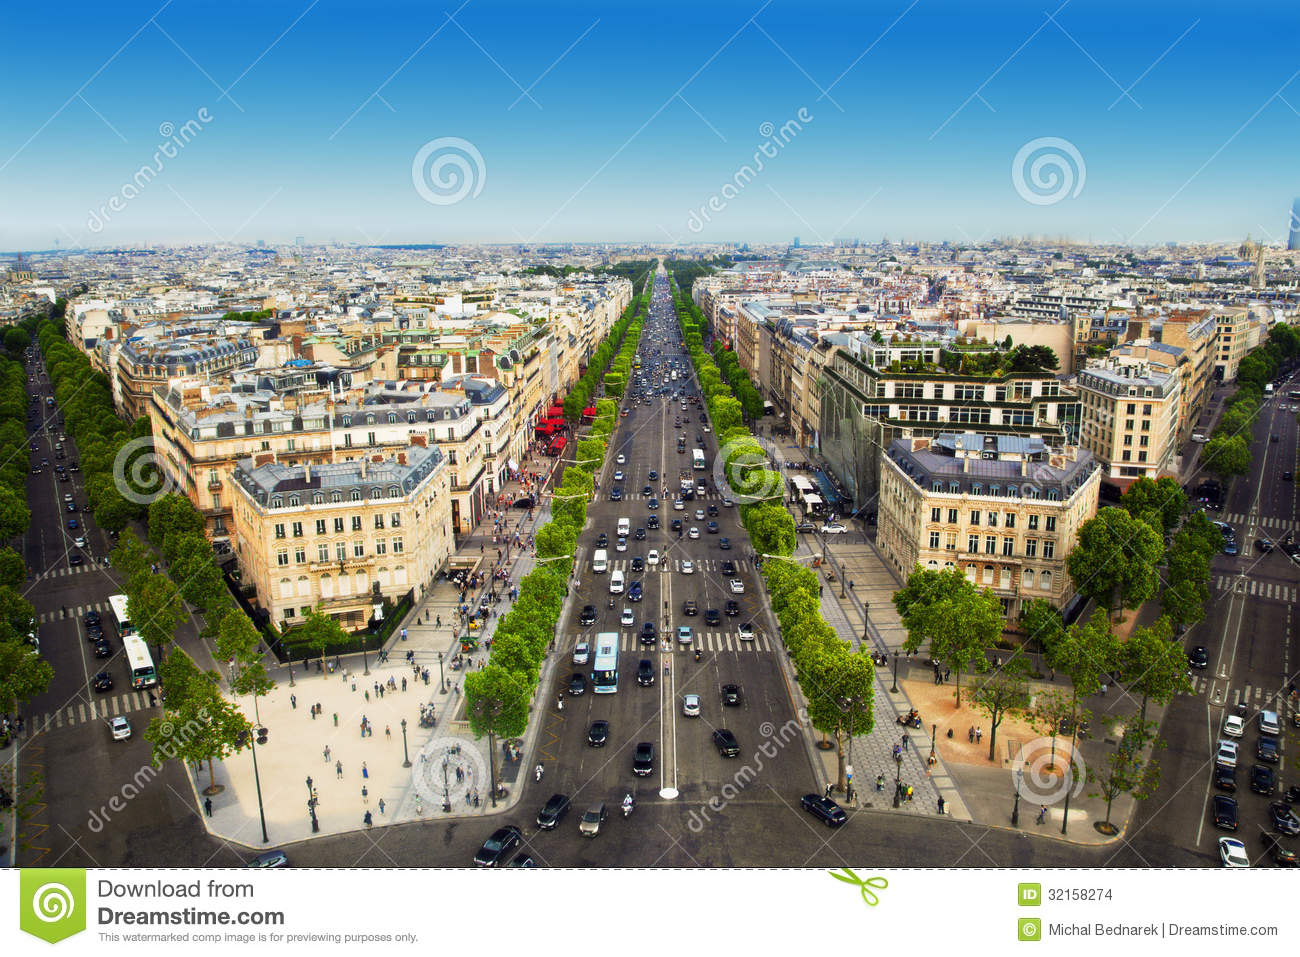 Champ elysees road clipart.